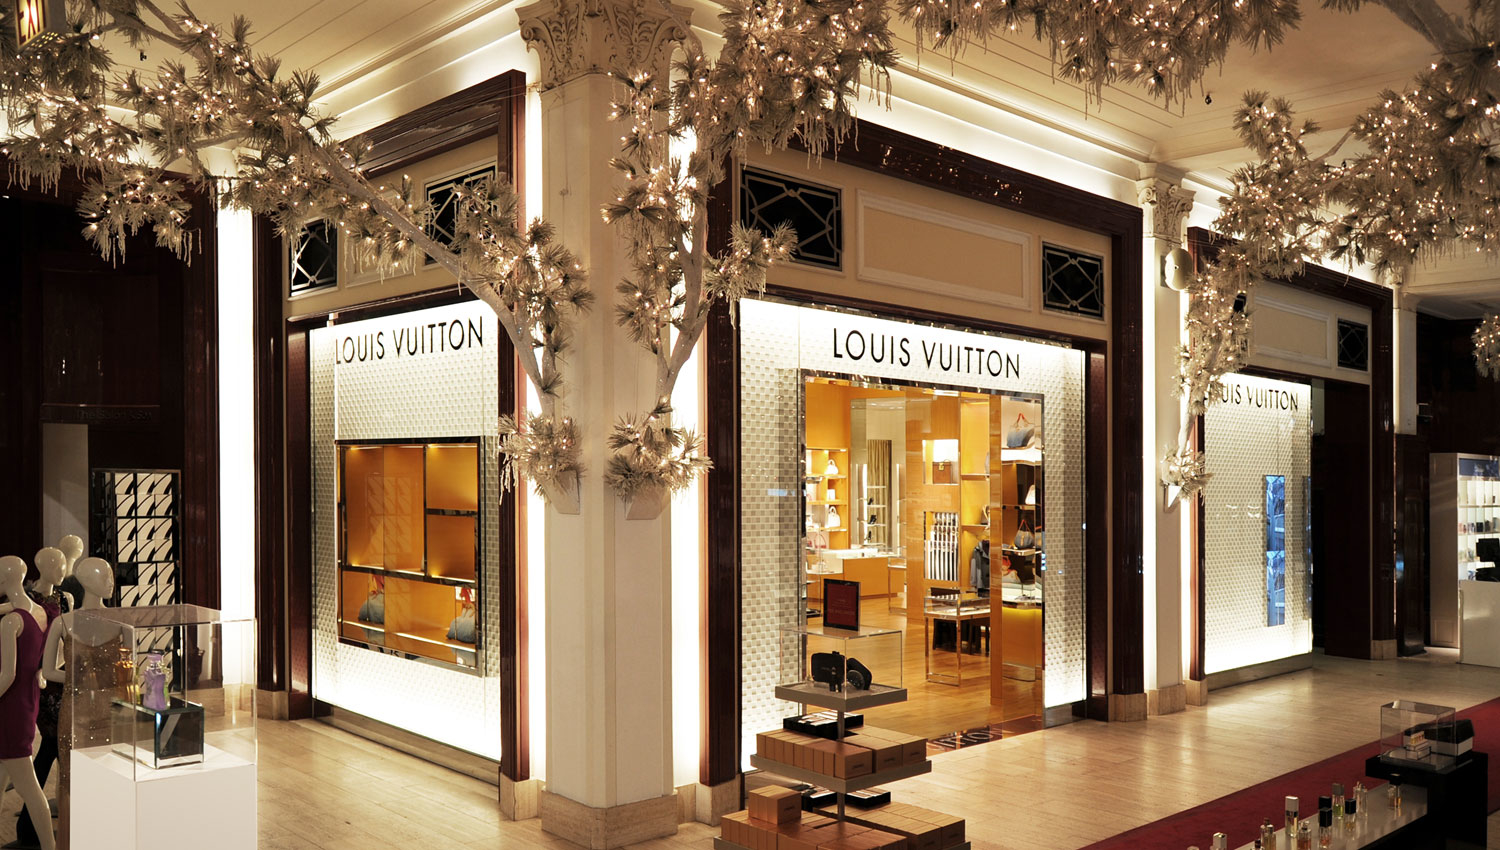 Louis Vuitton New York Saks Fifth Ave, New York New York (NY) - www.waterandnature.org